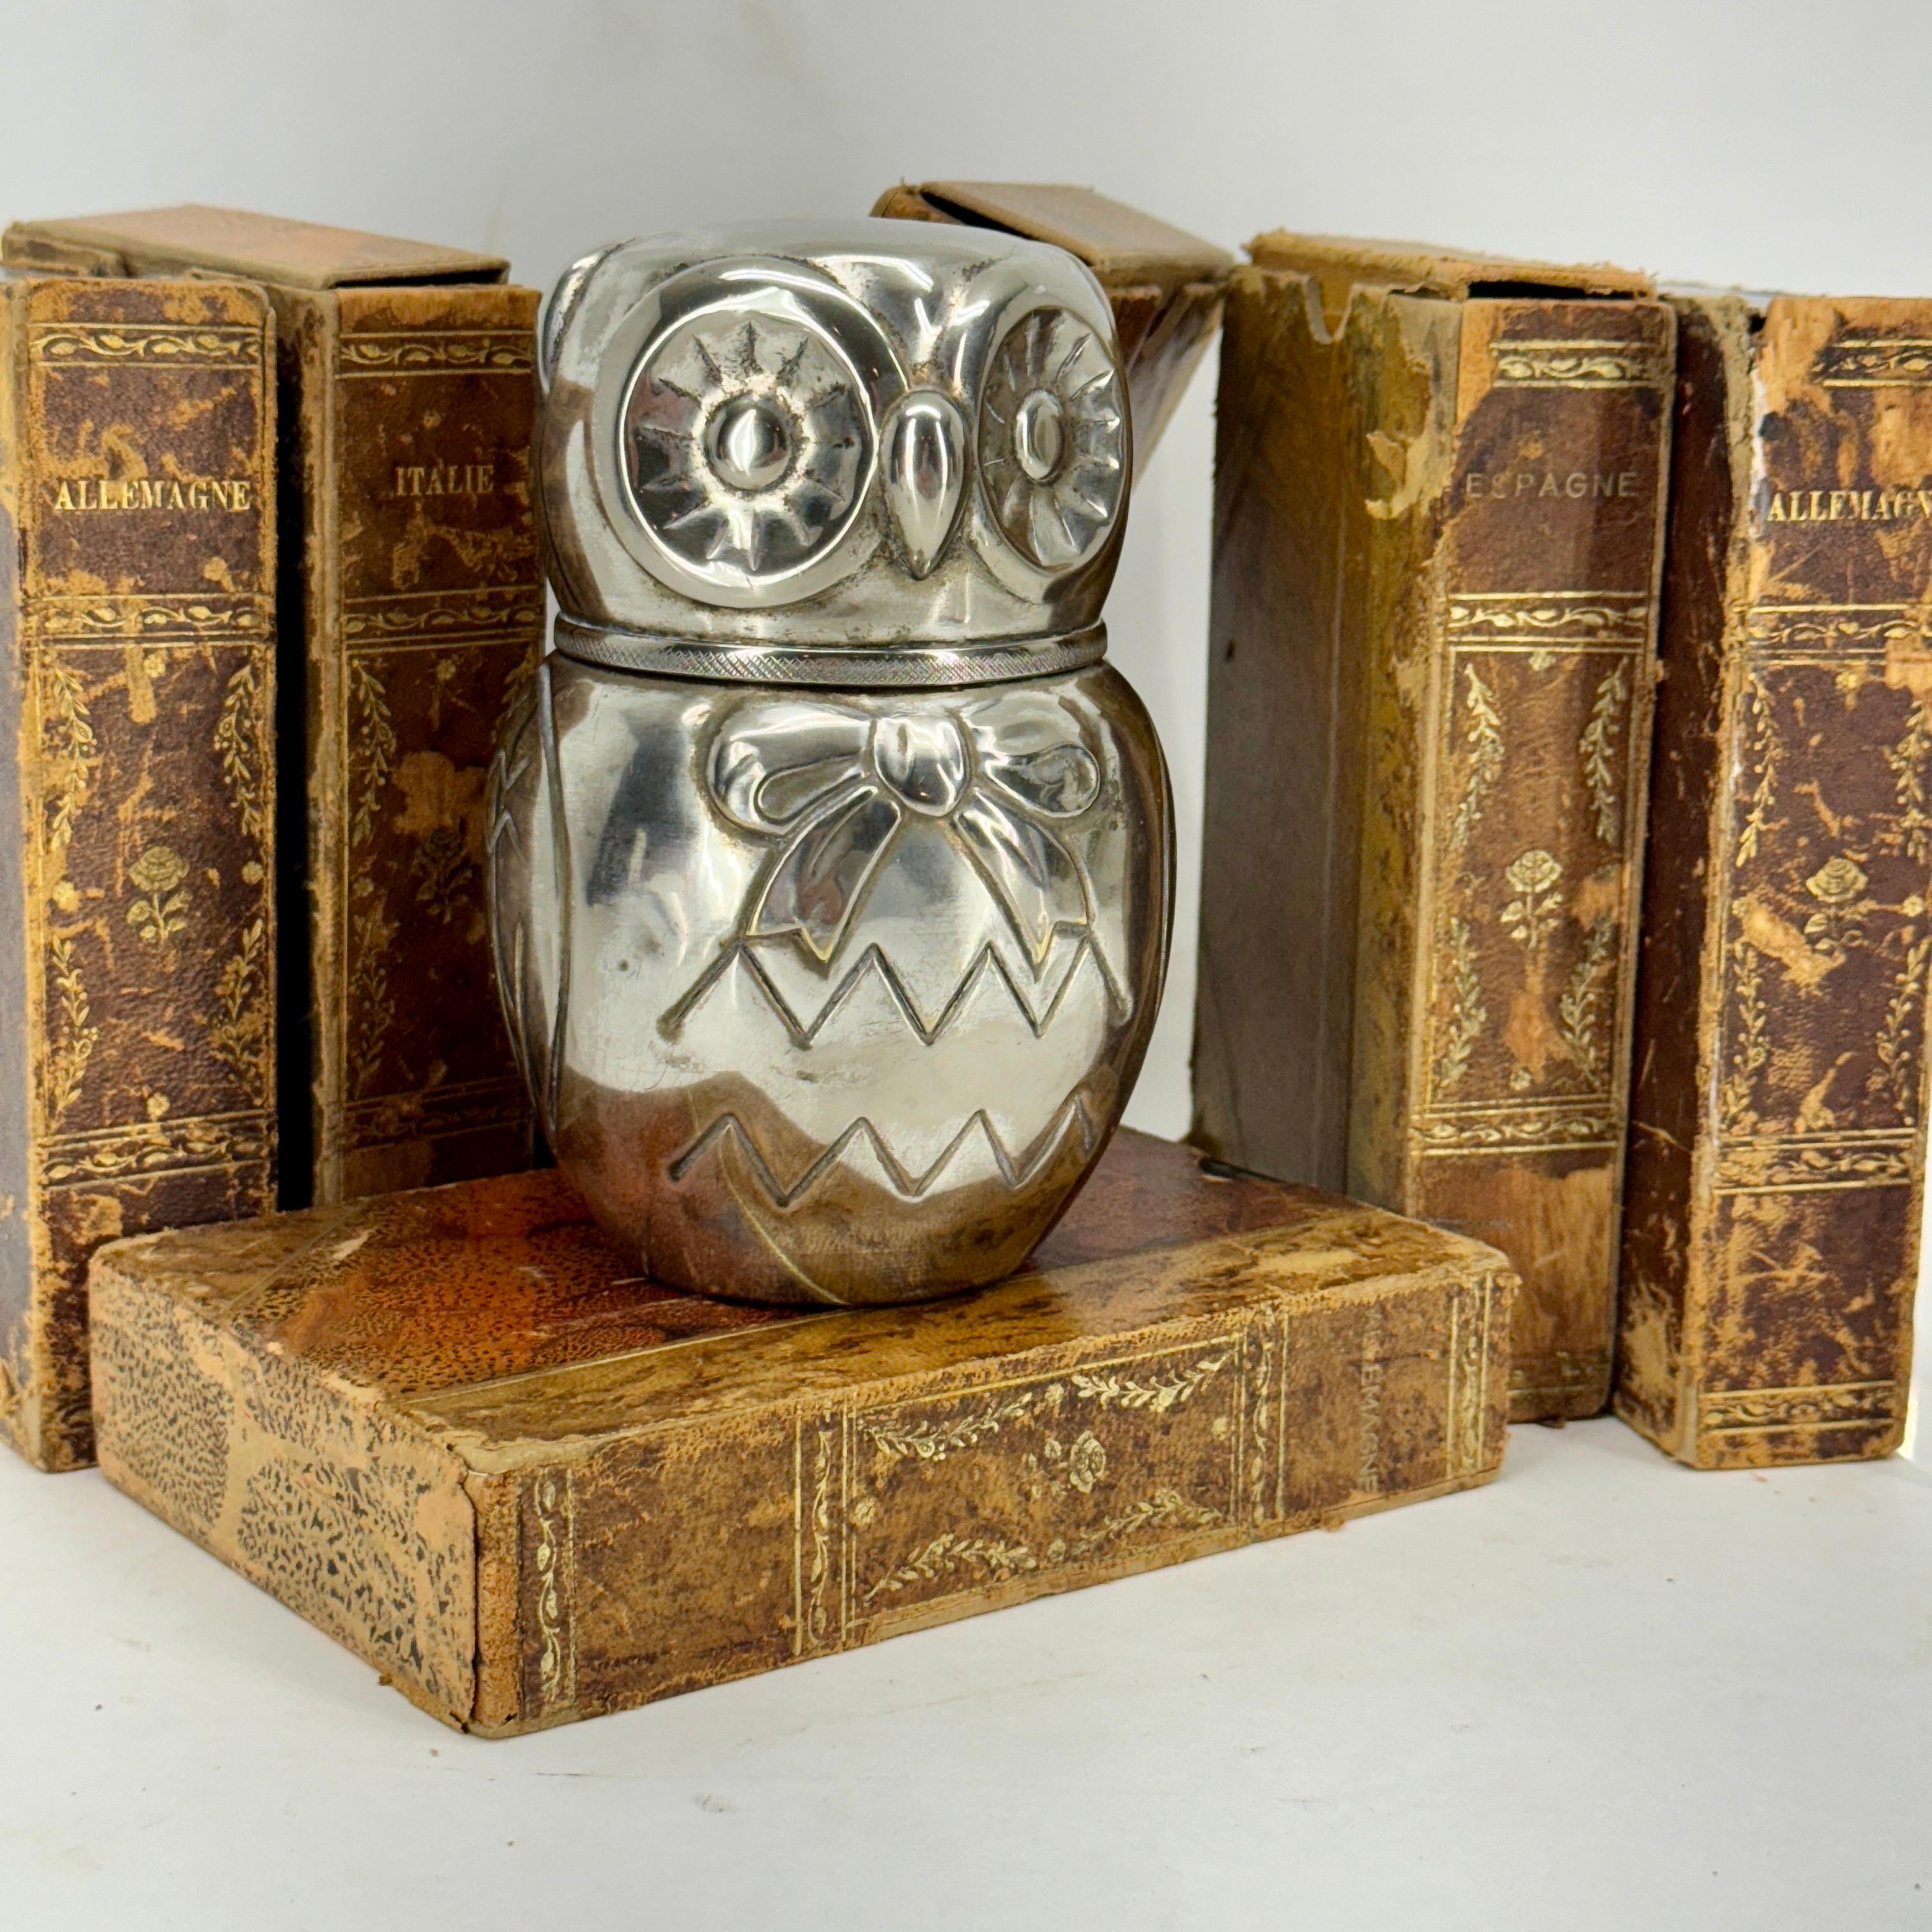 Vintage Money Bank of an Owl in Italian Silver Plate.
This charming money bank comes in two parts that is easily opened. This bank is very functional as a bank but also wonderful displayed on a bookshelf. Great gift for the owl collector in your